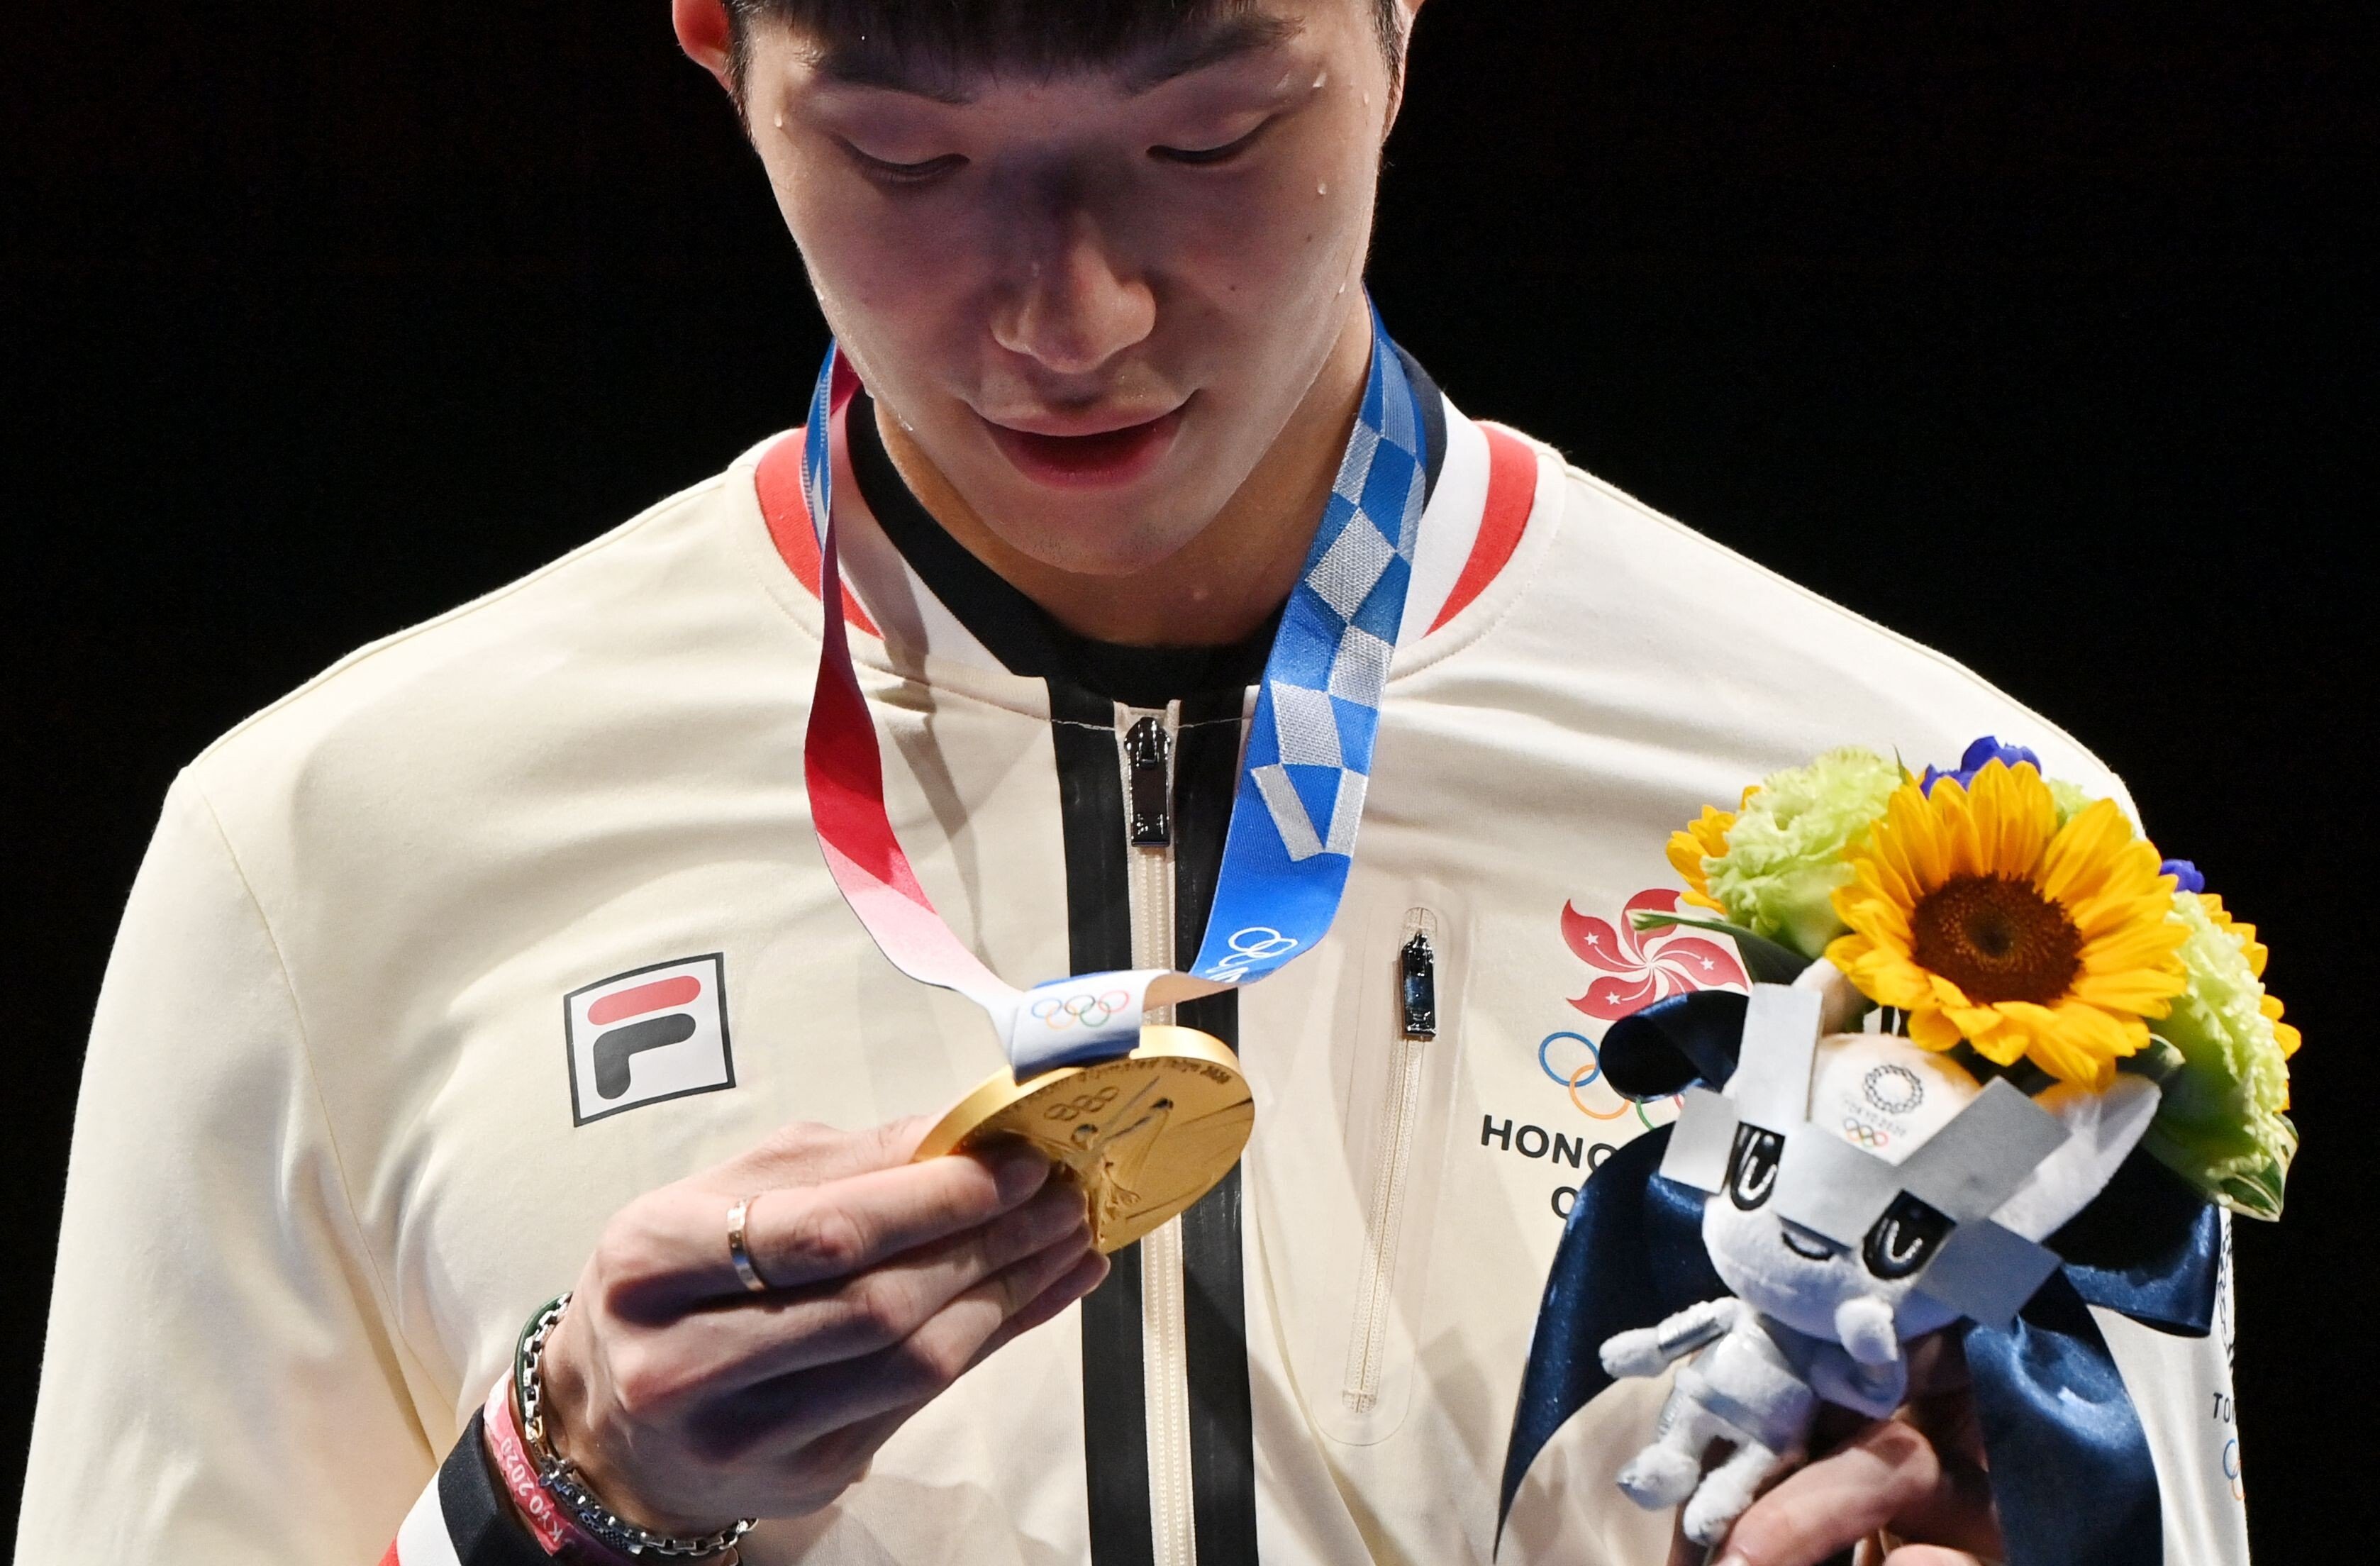 Hong Kong fencer Edgar Cheung got HK$7.5 million for his gold medal, but if he hopes to buy a house, he will probably need significantly more. Photo: AFP